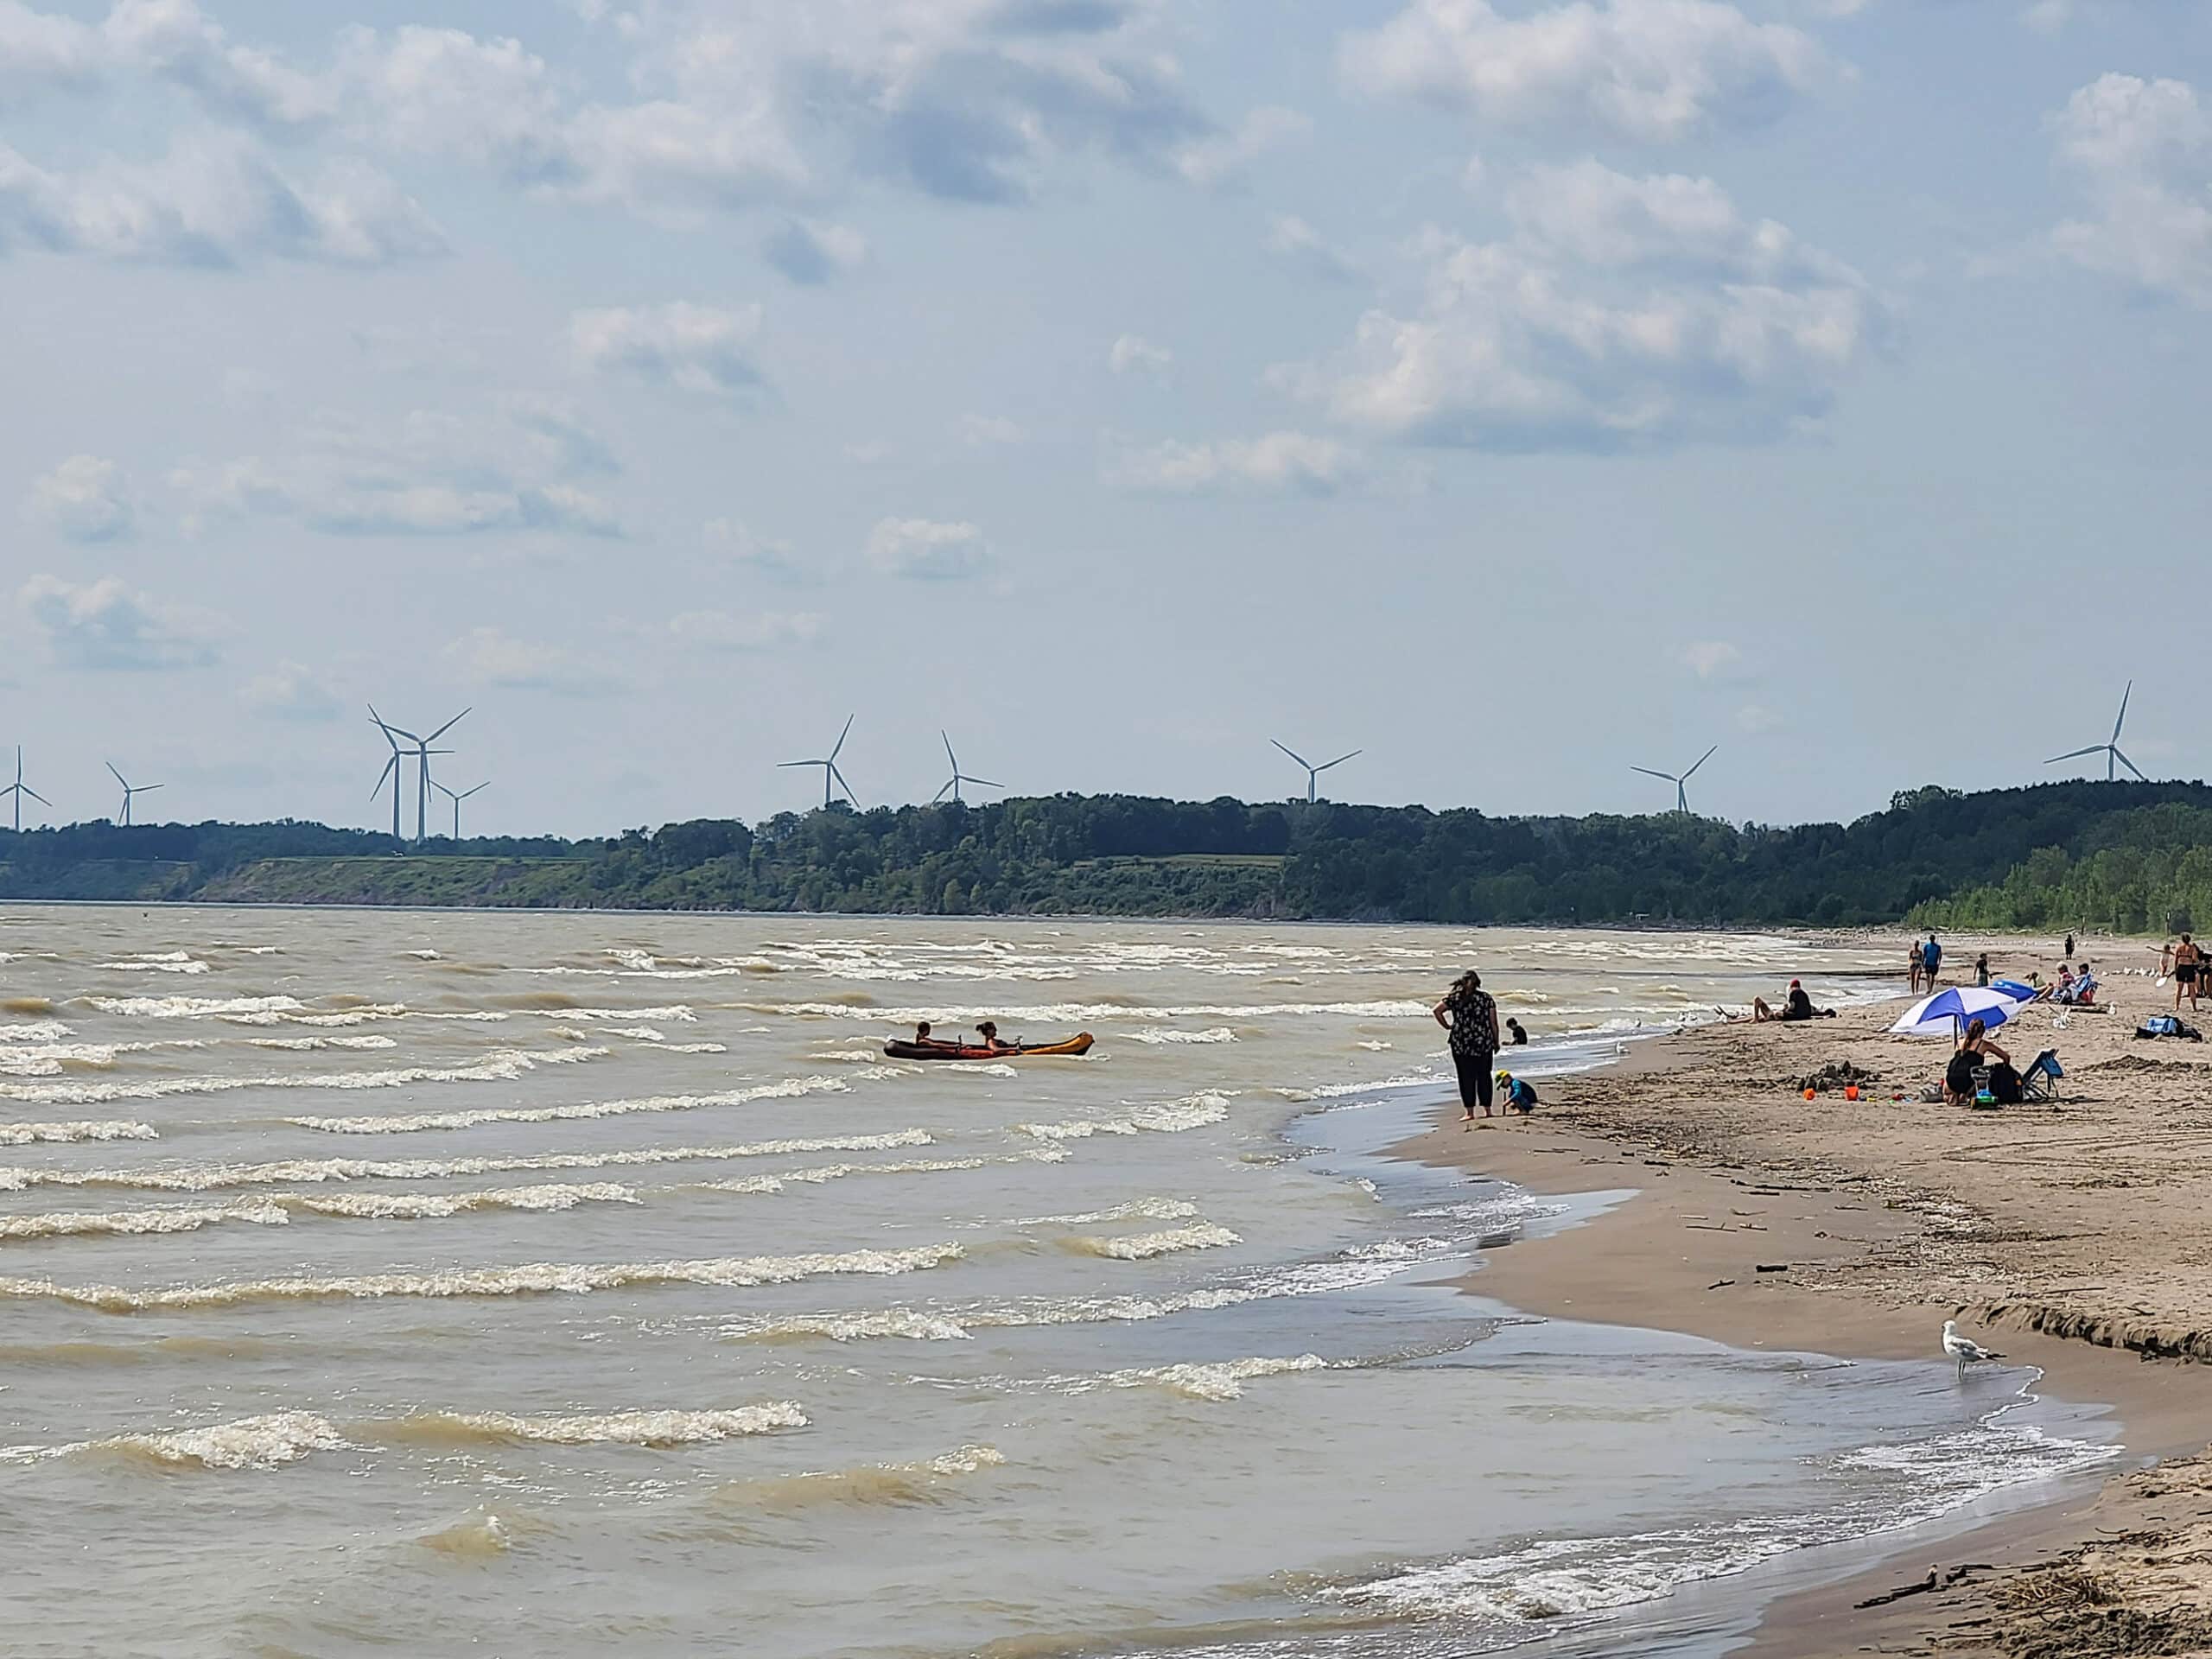 The beach at port burwell, with many waves rolling in.